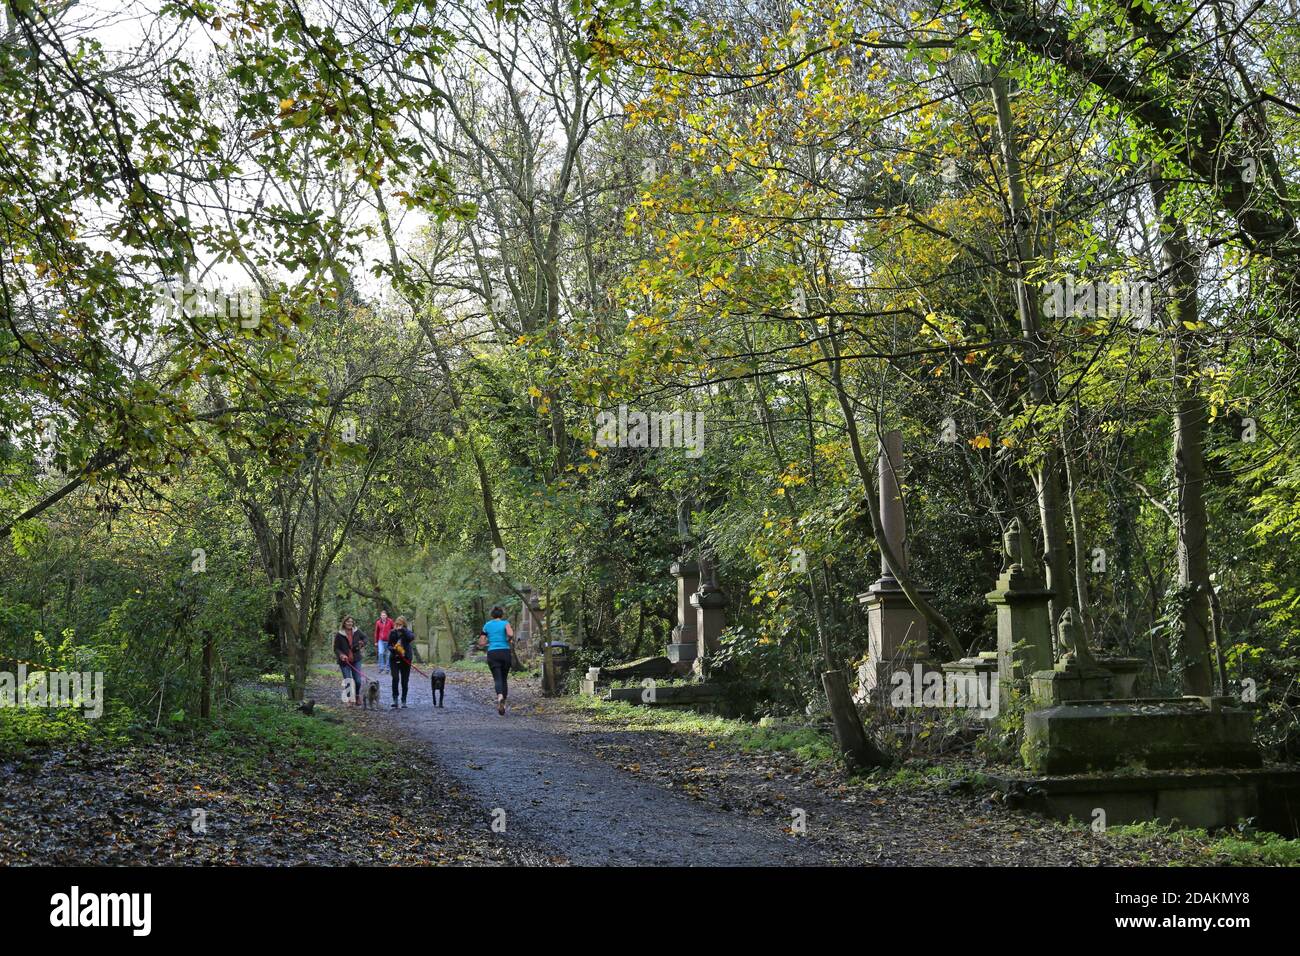 Dog walkers and runners in Nunhead Cemetery, south London, UK. An impressive Victorian cemetery now wild and overgrown, but popular with local people. Stock Photo